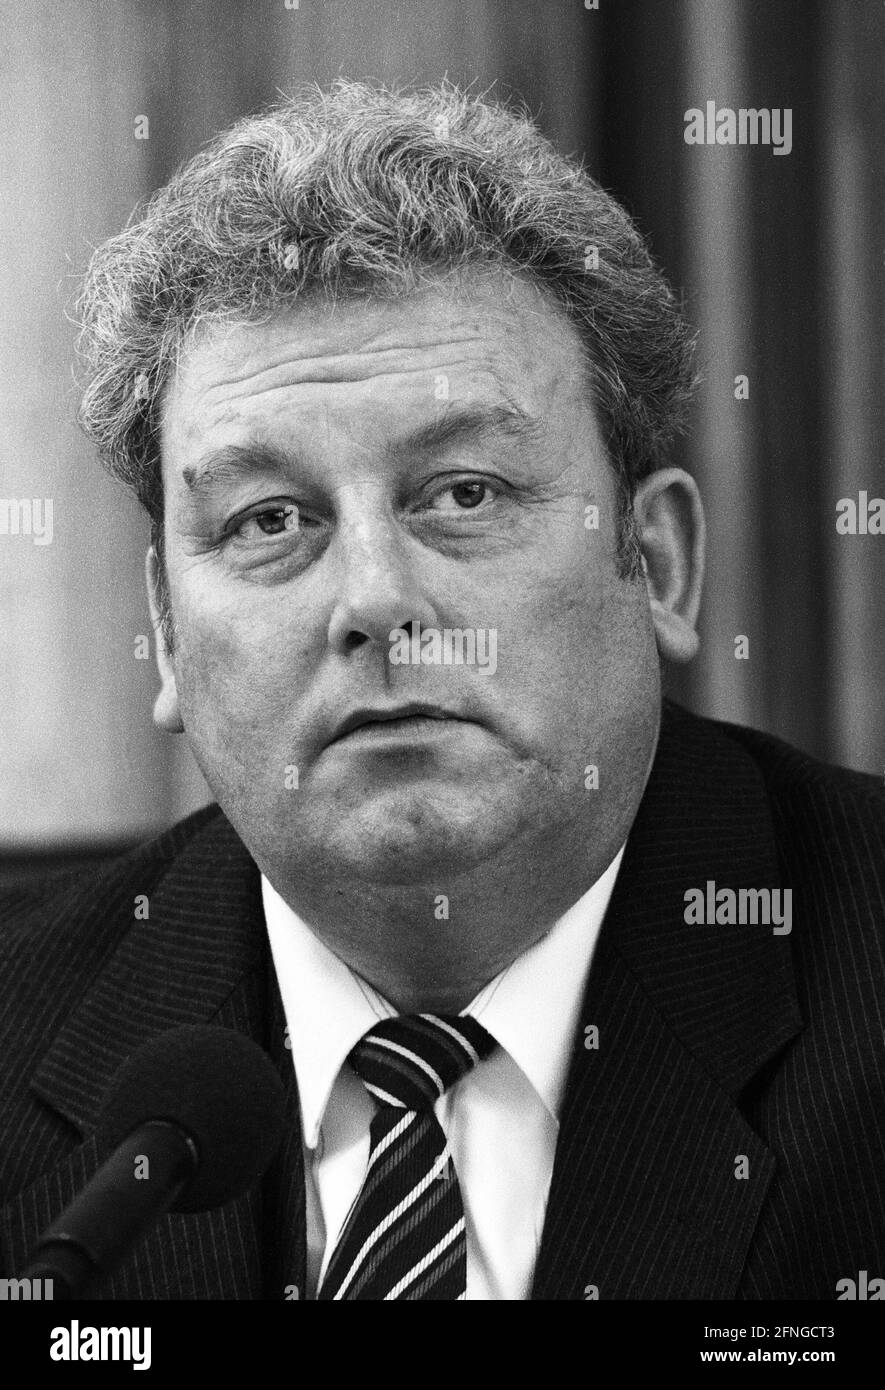 Germany, Bonn , 23.02.1990 Archive-No.: 14-05-35 GDR Minister of the Environment Diederich in Bonn Photo: GDR Minister of the Environment Dr. Peter Diederich [automated translation] Stock Photo